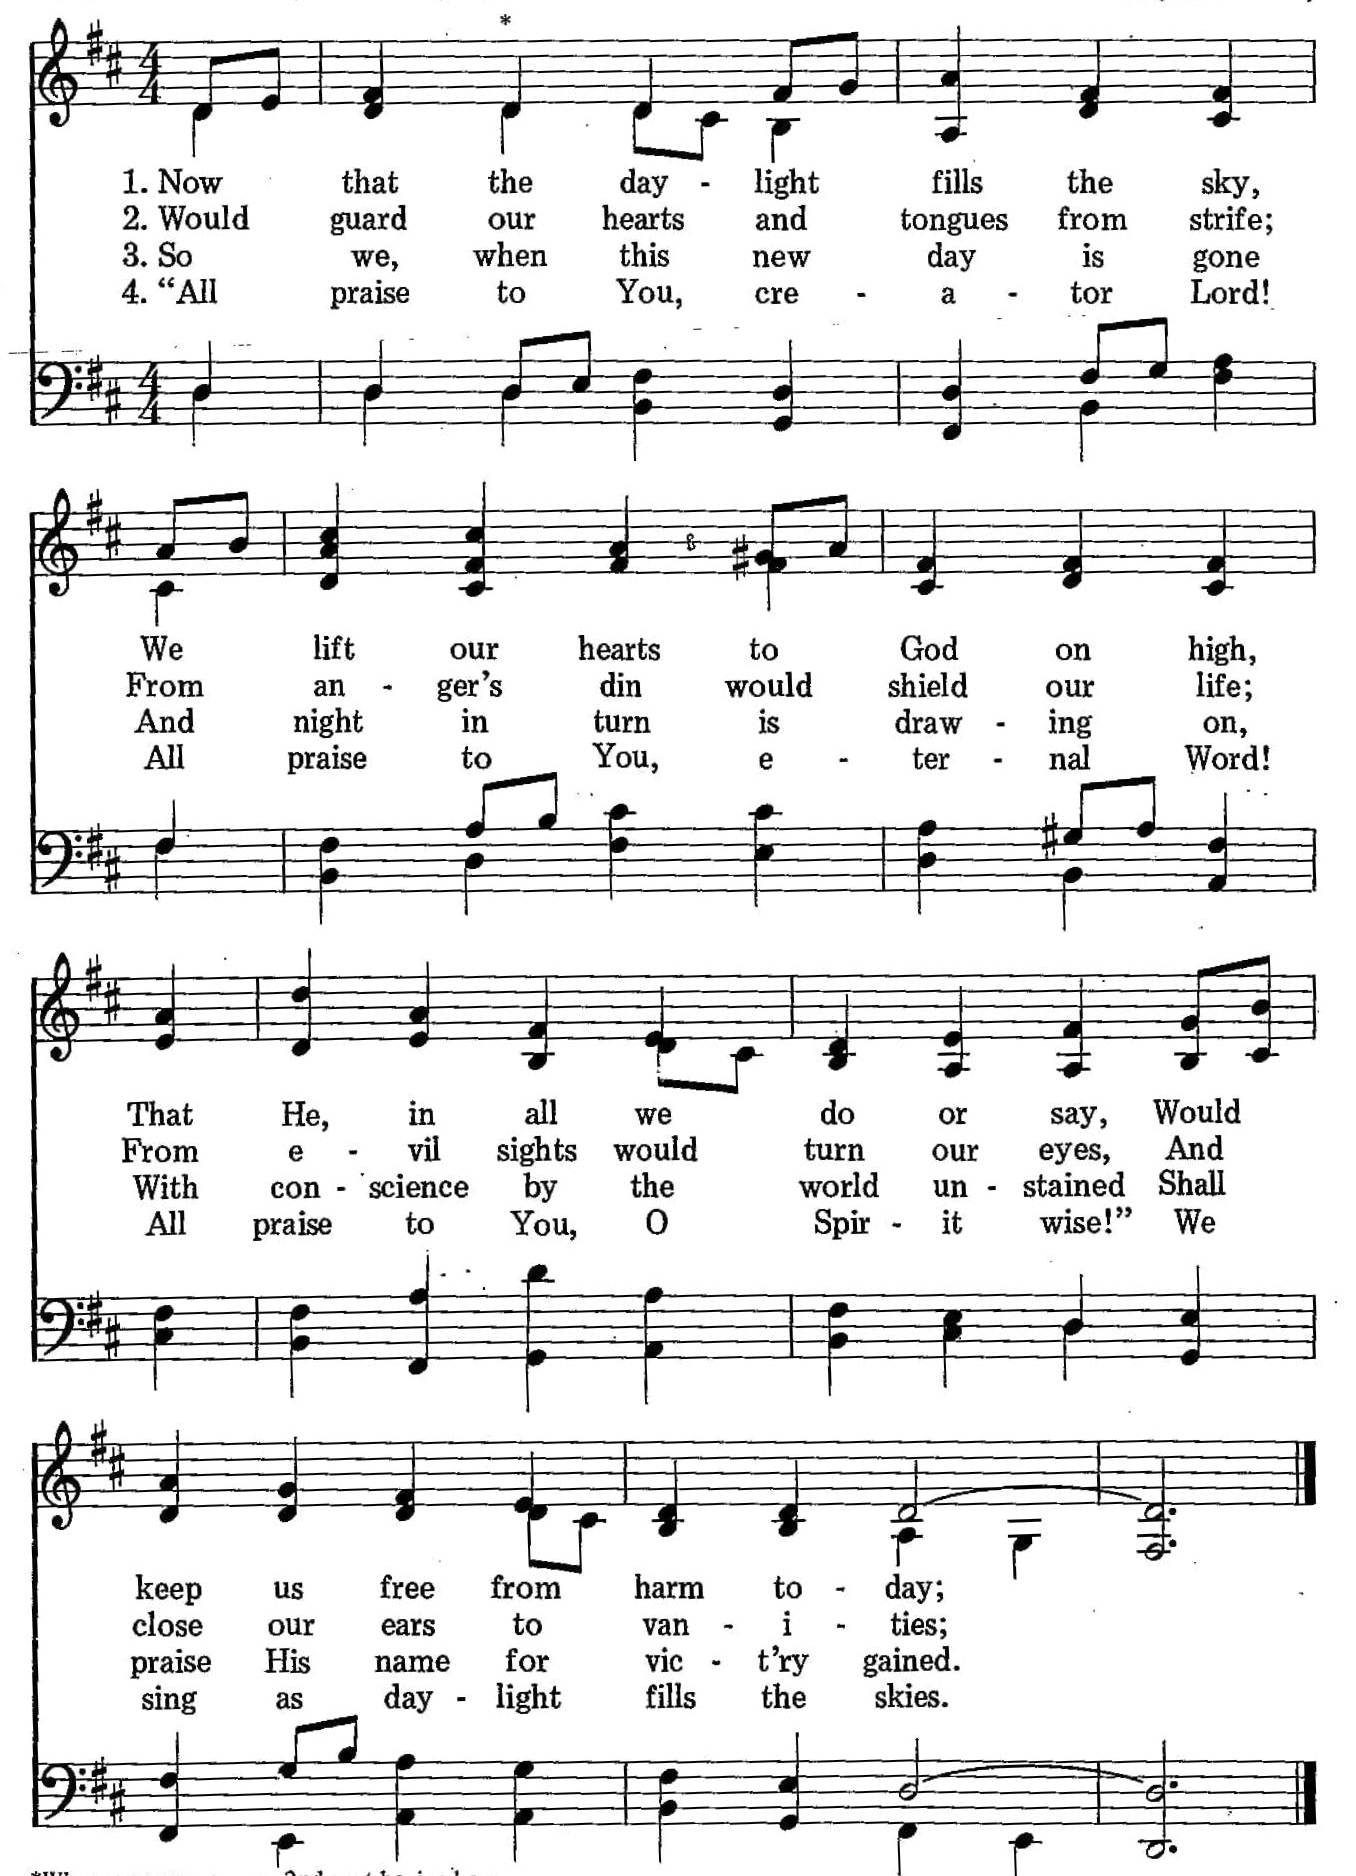 042 – Now That the Daylight Fills the Sky sheet music